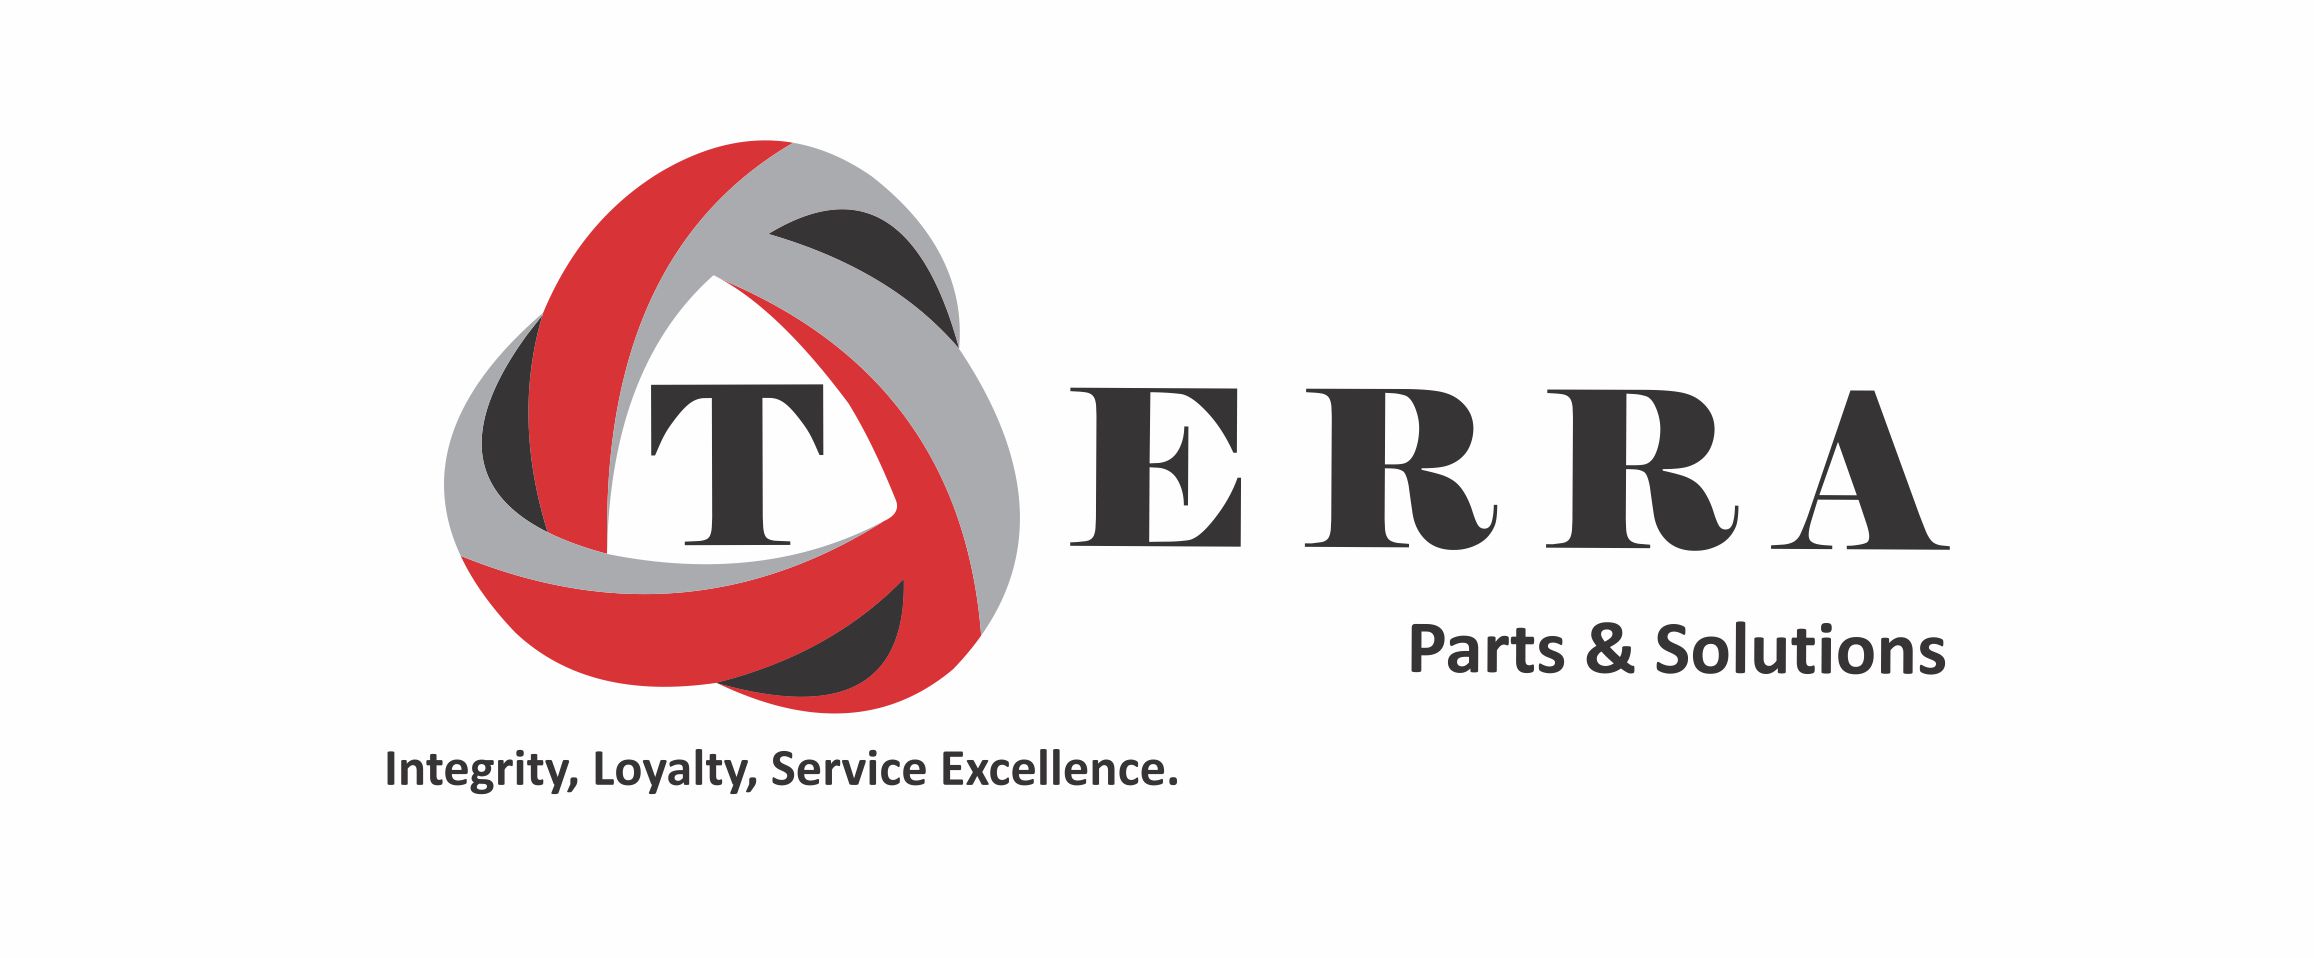 https://www.mncjobs.co.za/company/terra-parts-solutions